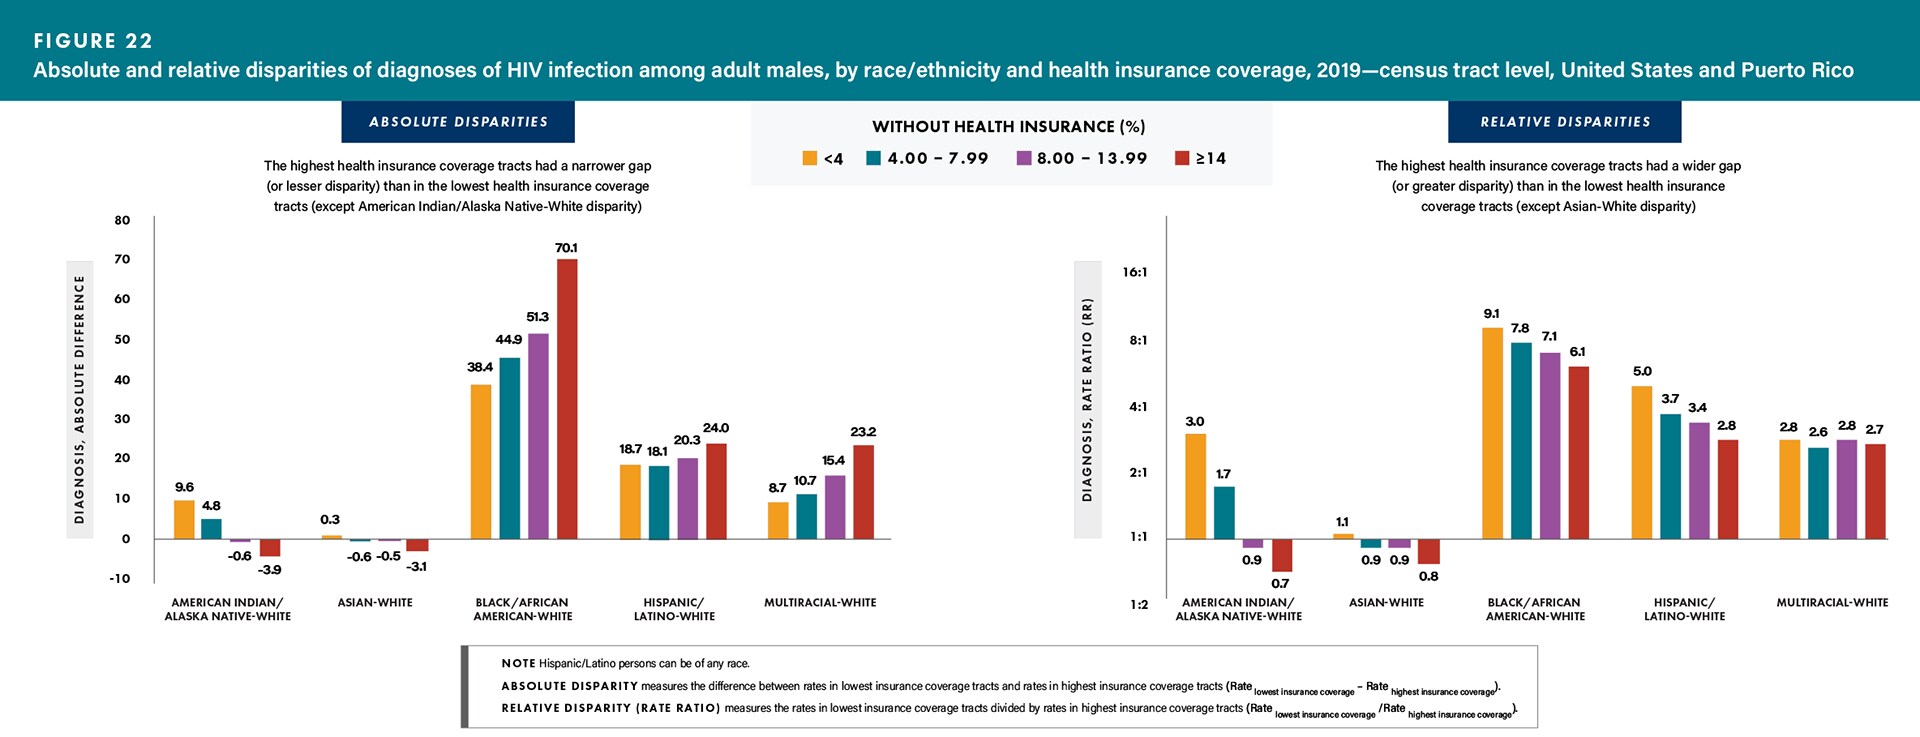 For absolute disparities, the highest health insurance coverage tracts had a narrower gap (or lesser disparity) than in the lowest health insurance coverage tracts (except American Indian/Alaskan Native-White disparity). For relative disparities, the highest health insurance coverage tracts had a wider gap (or greater disparity) than in the lowest health insurance coverage tracts (except Asian-White disparity).